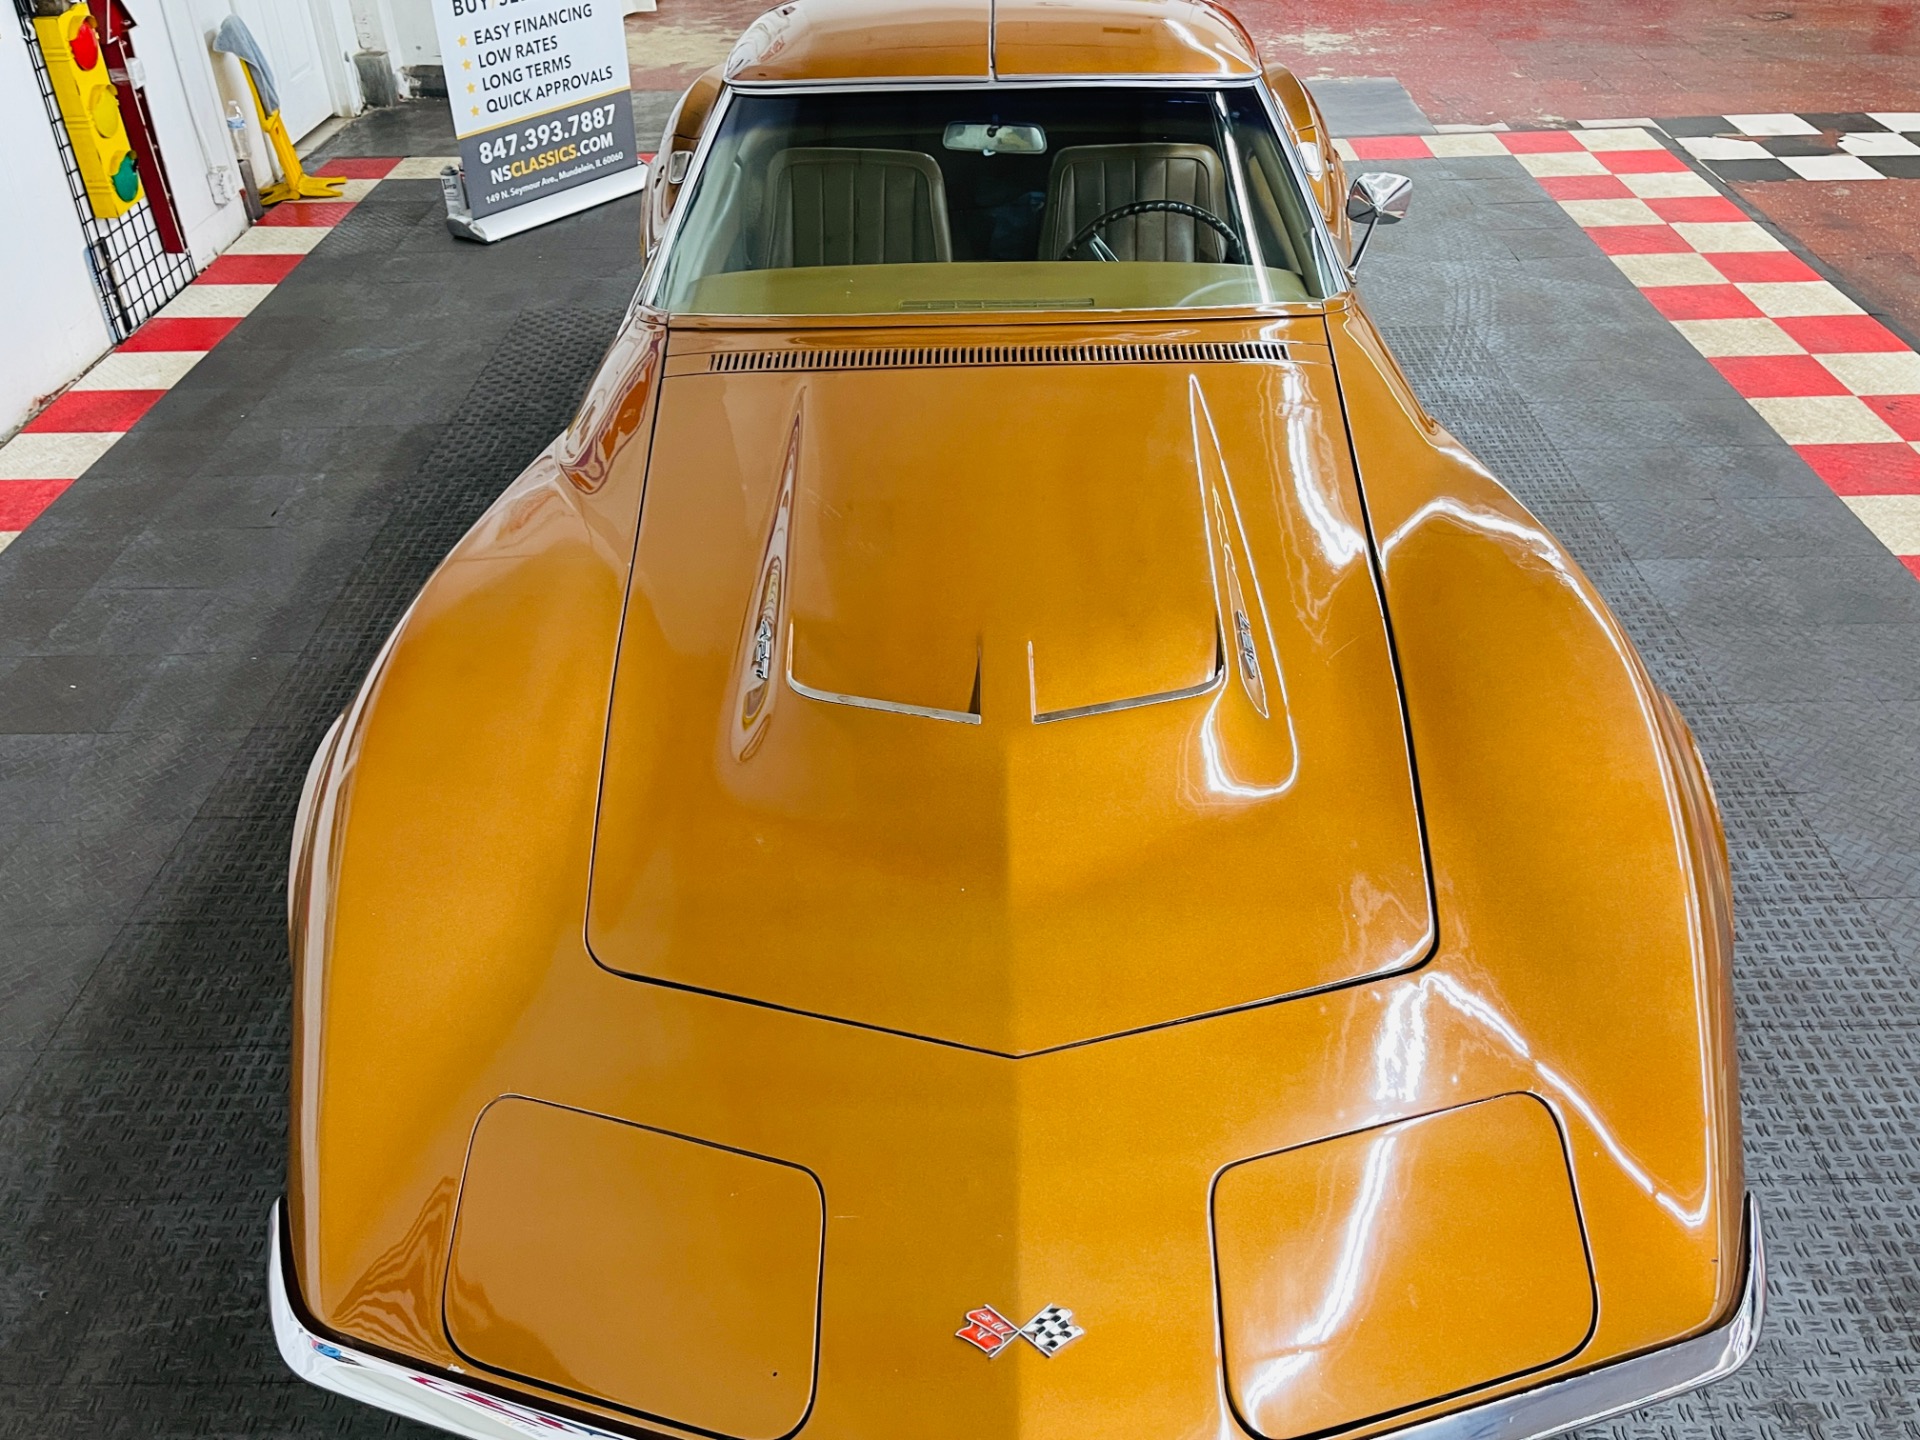 Used 1968 Chevrolet Corvette - NUMBERS MATCHING 427 ENGINE - TANK STICKER - SEE VIDEO | Mundelein, IL